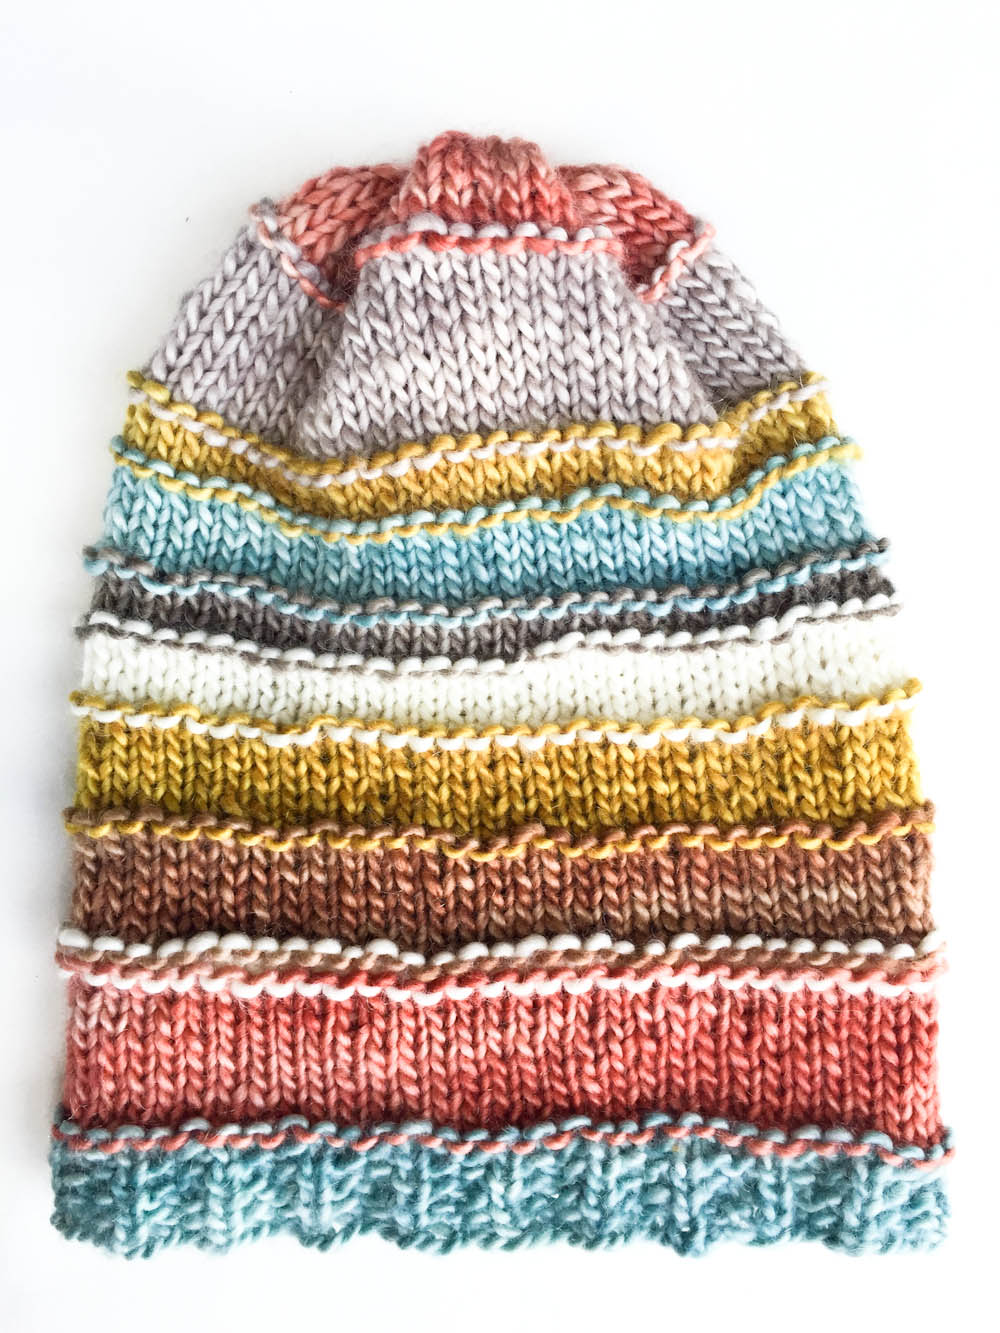 Free knit pattern for Waste Not Beanie by Cowgirlblues